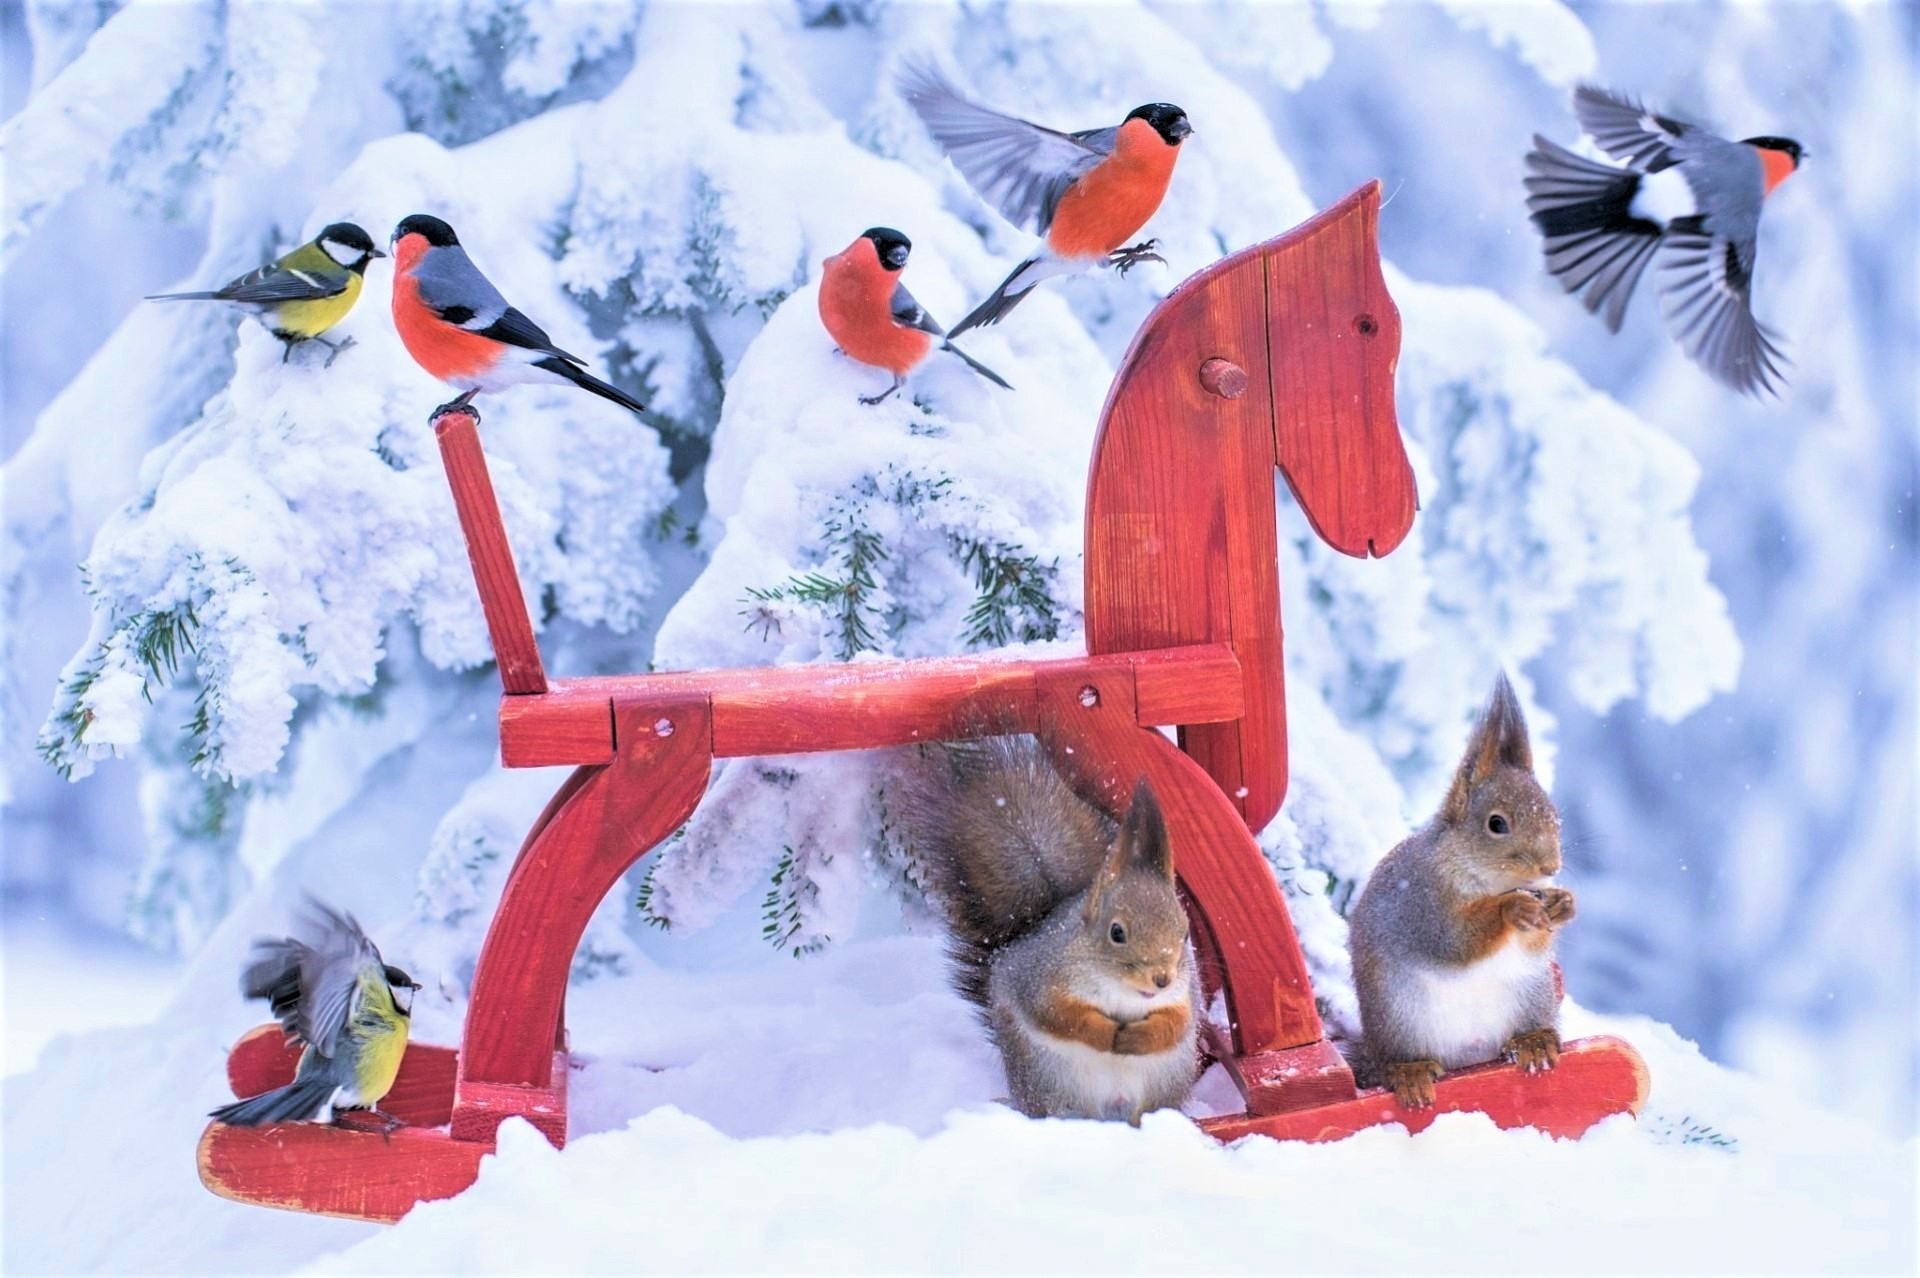 Bullfinches and Squirrels on Rocking Horse